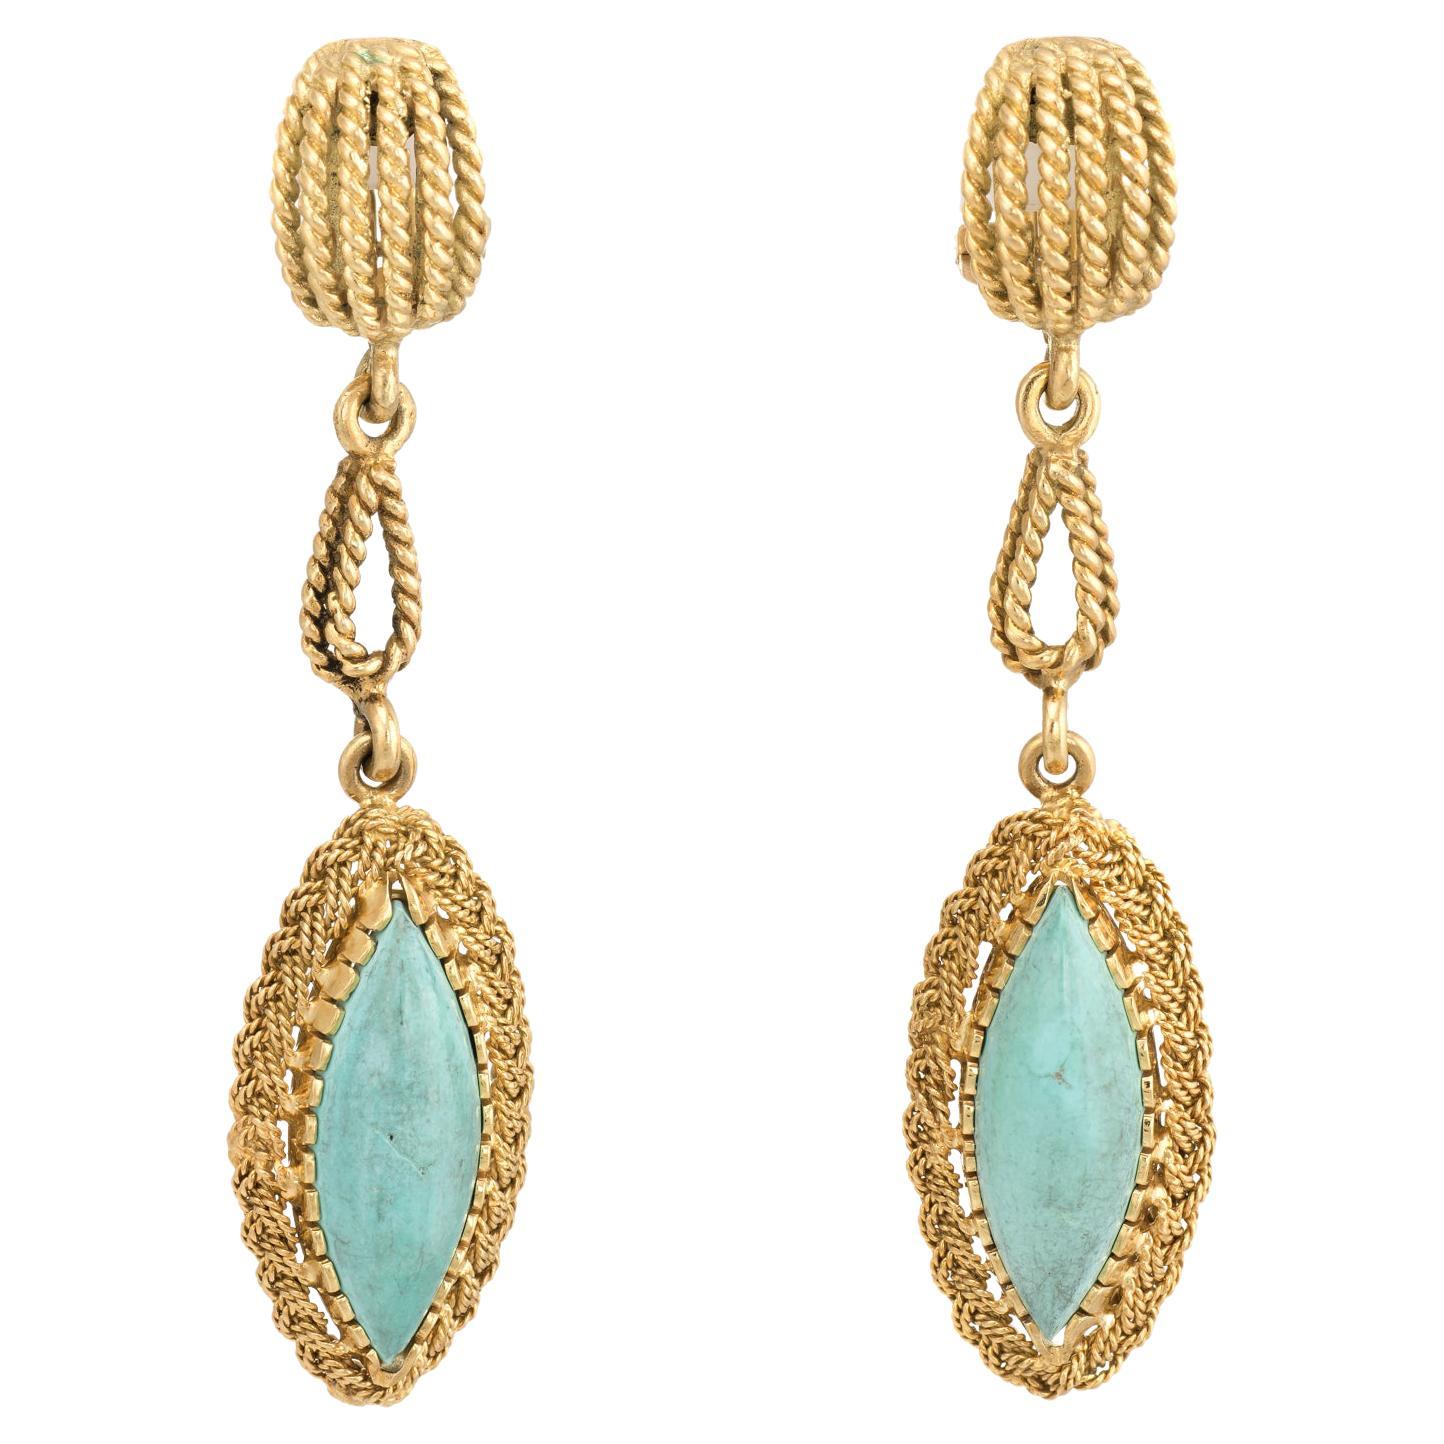 Vintage Turquoise Drop Earrings 18k Yellow Gold Rope Design Dangle Estate Fine For Sale